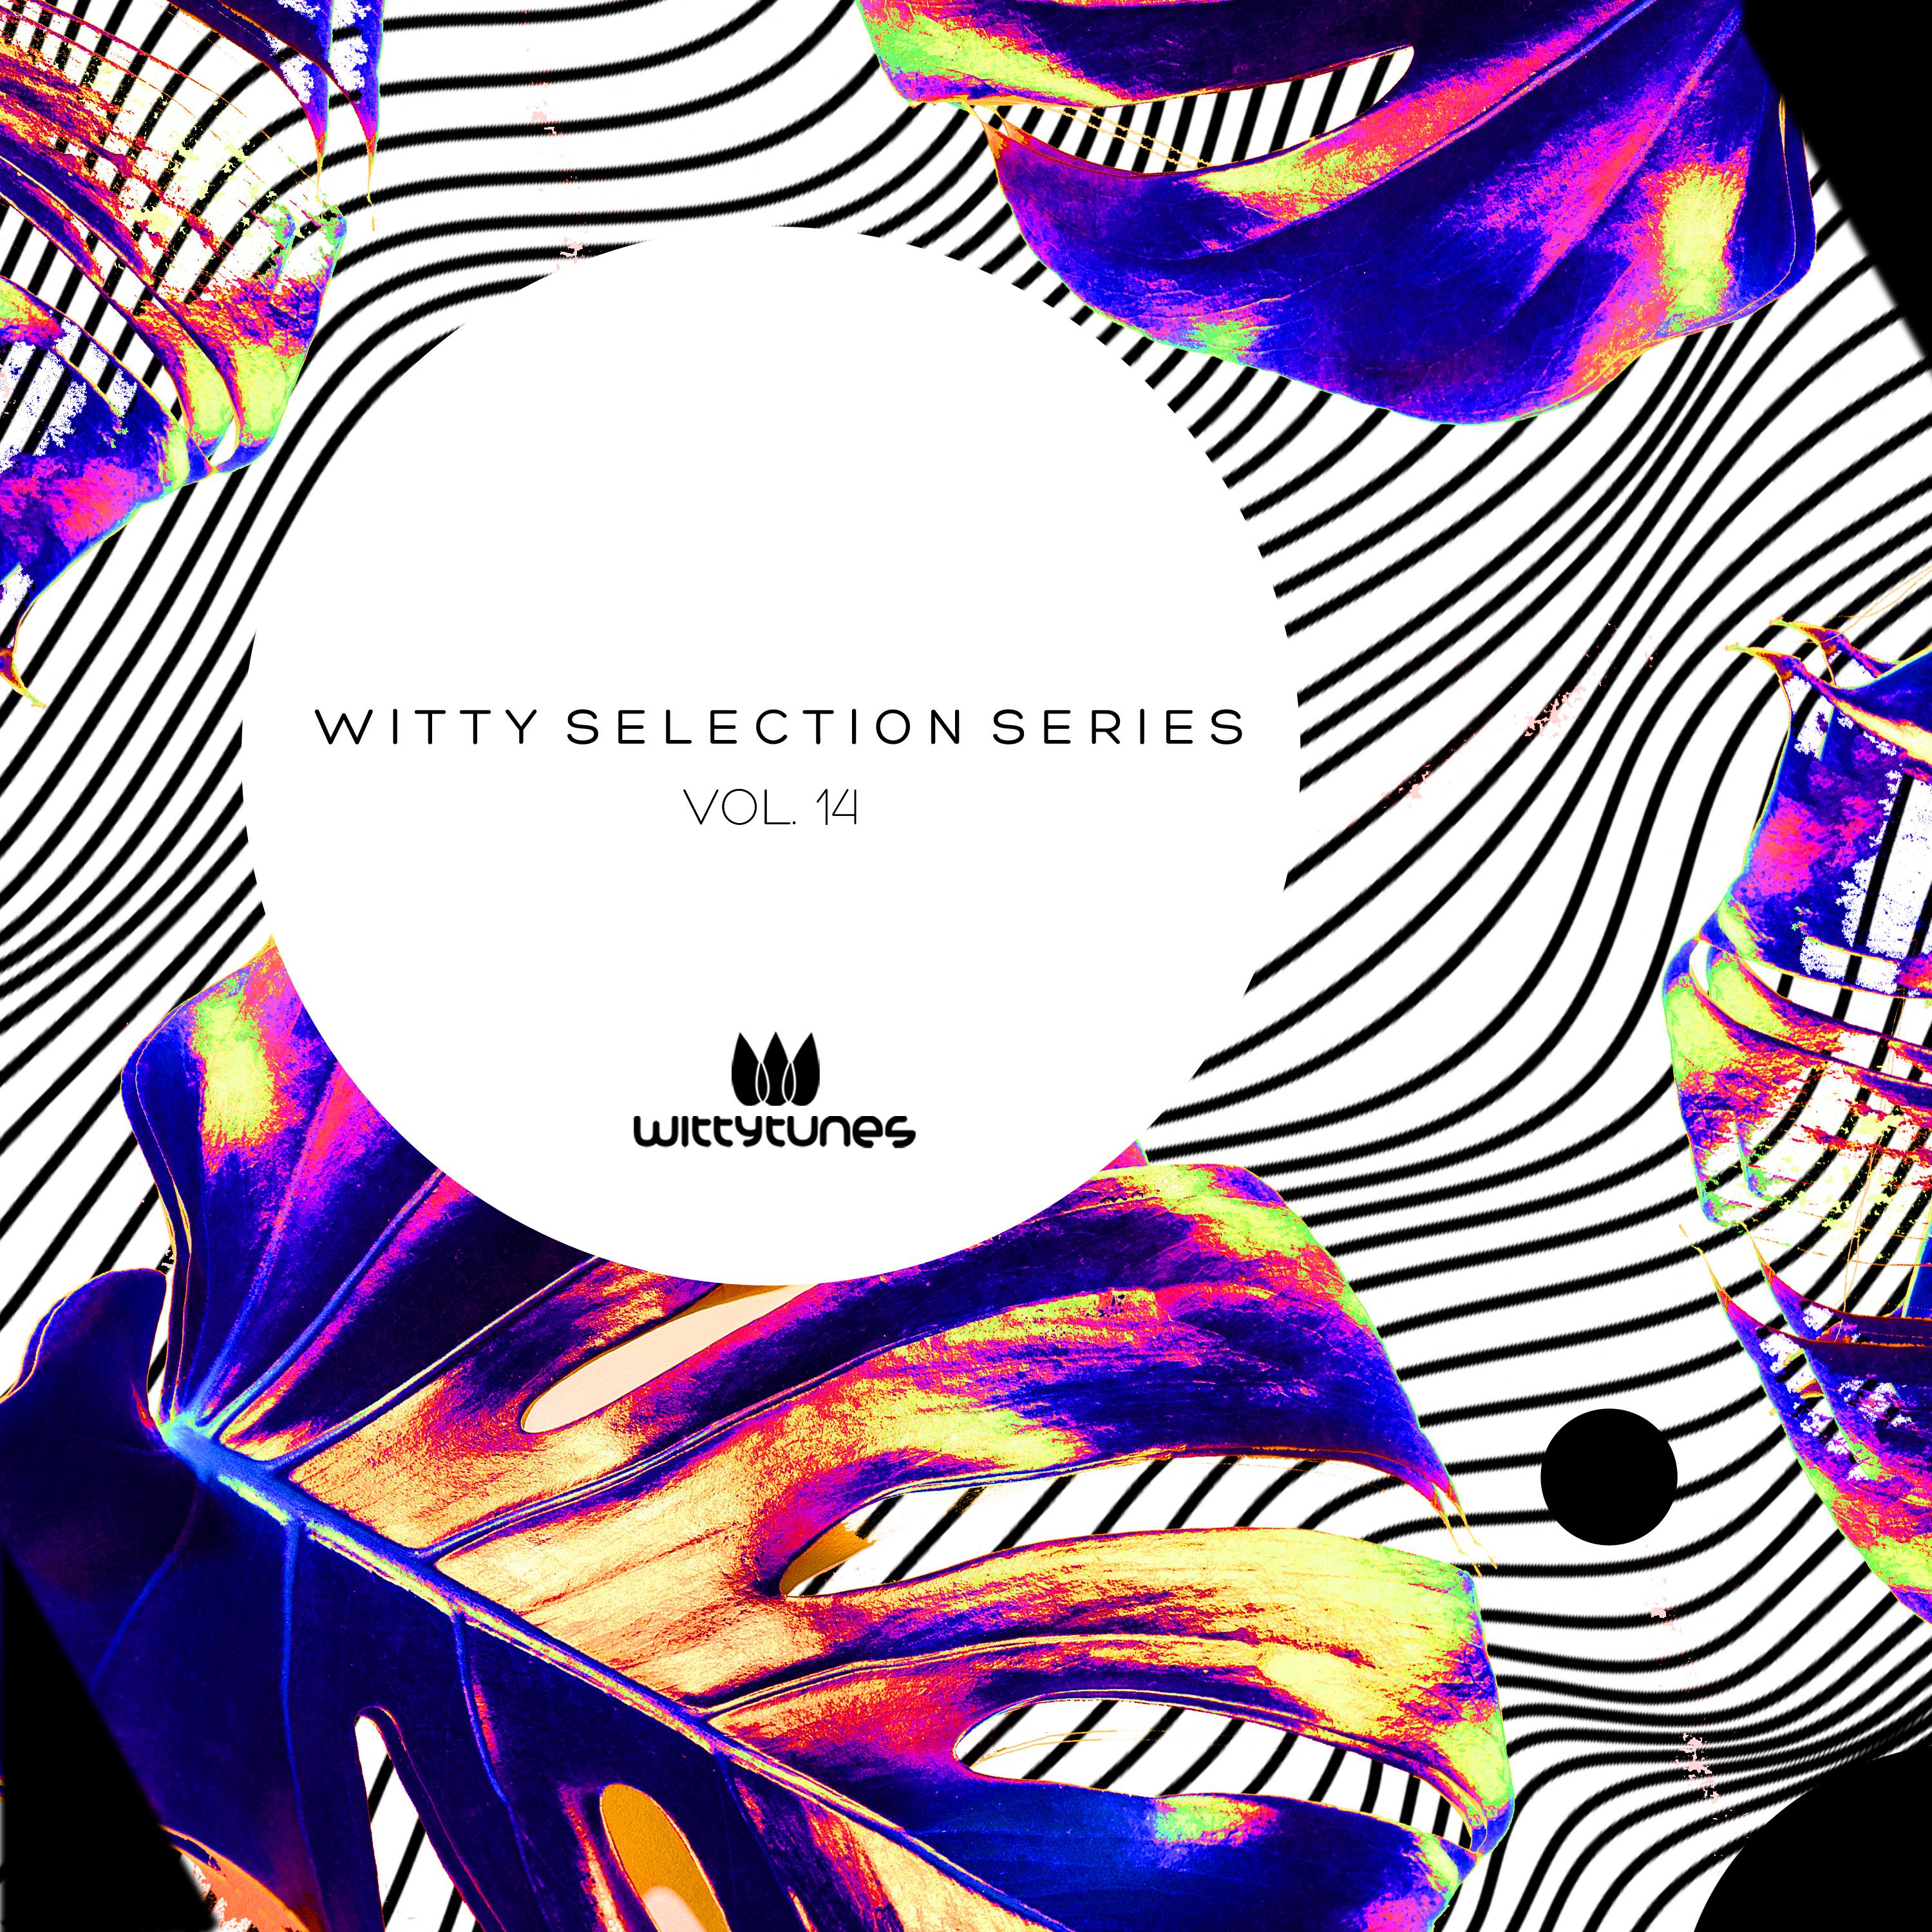 Witty Selection Series, Vol. 14